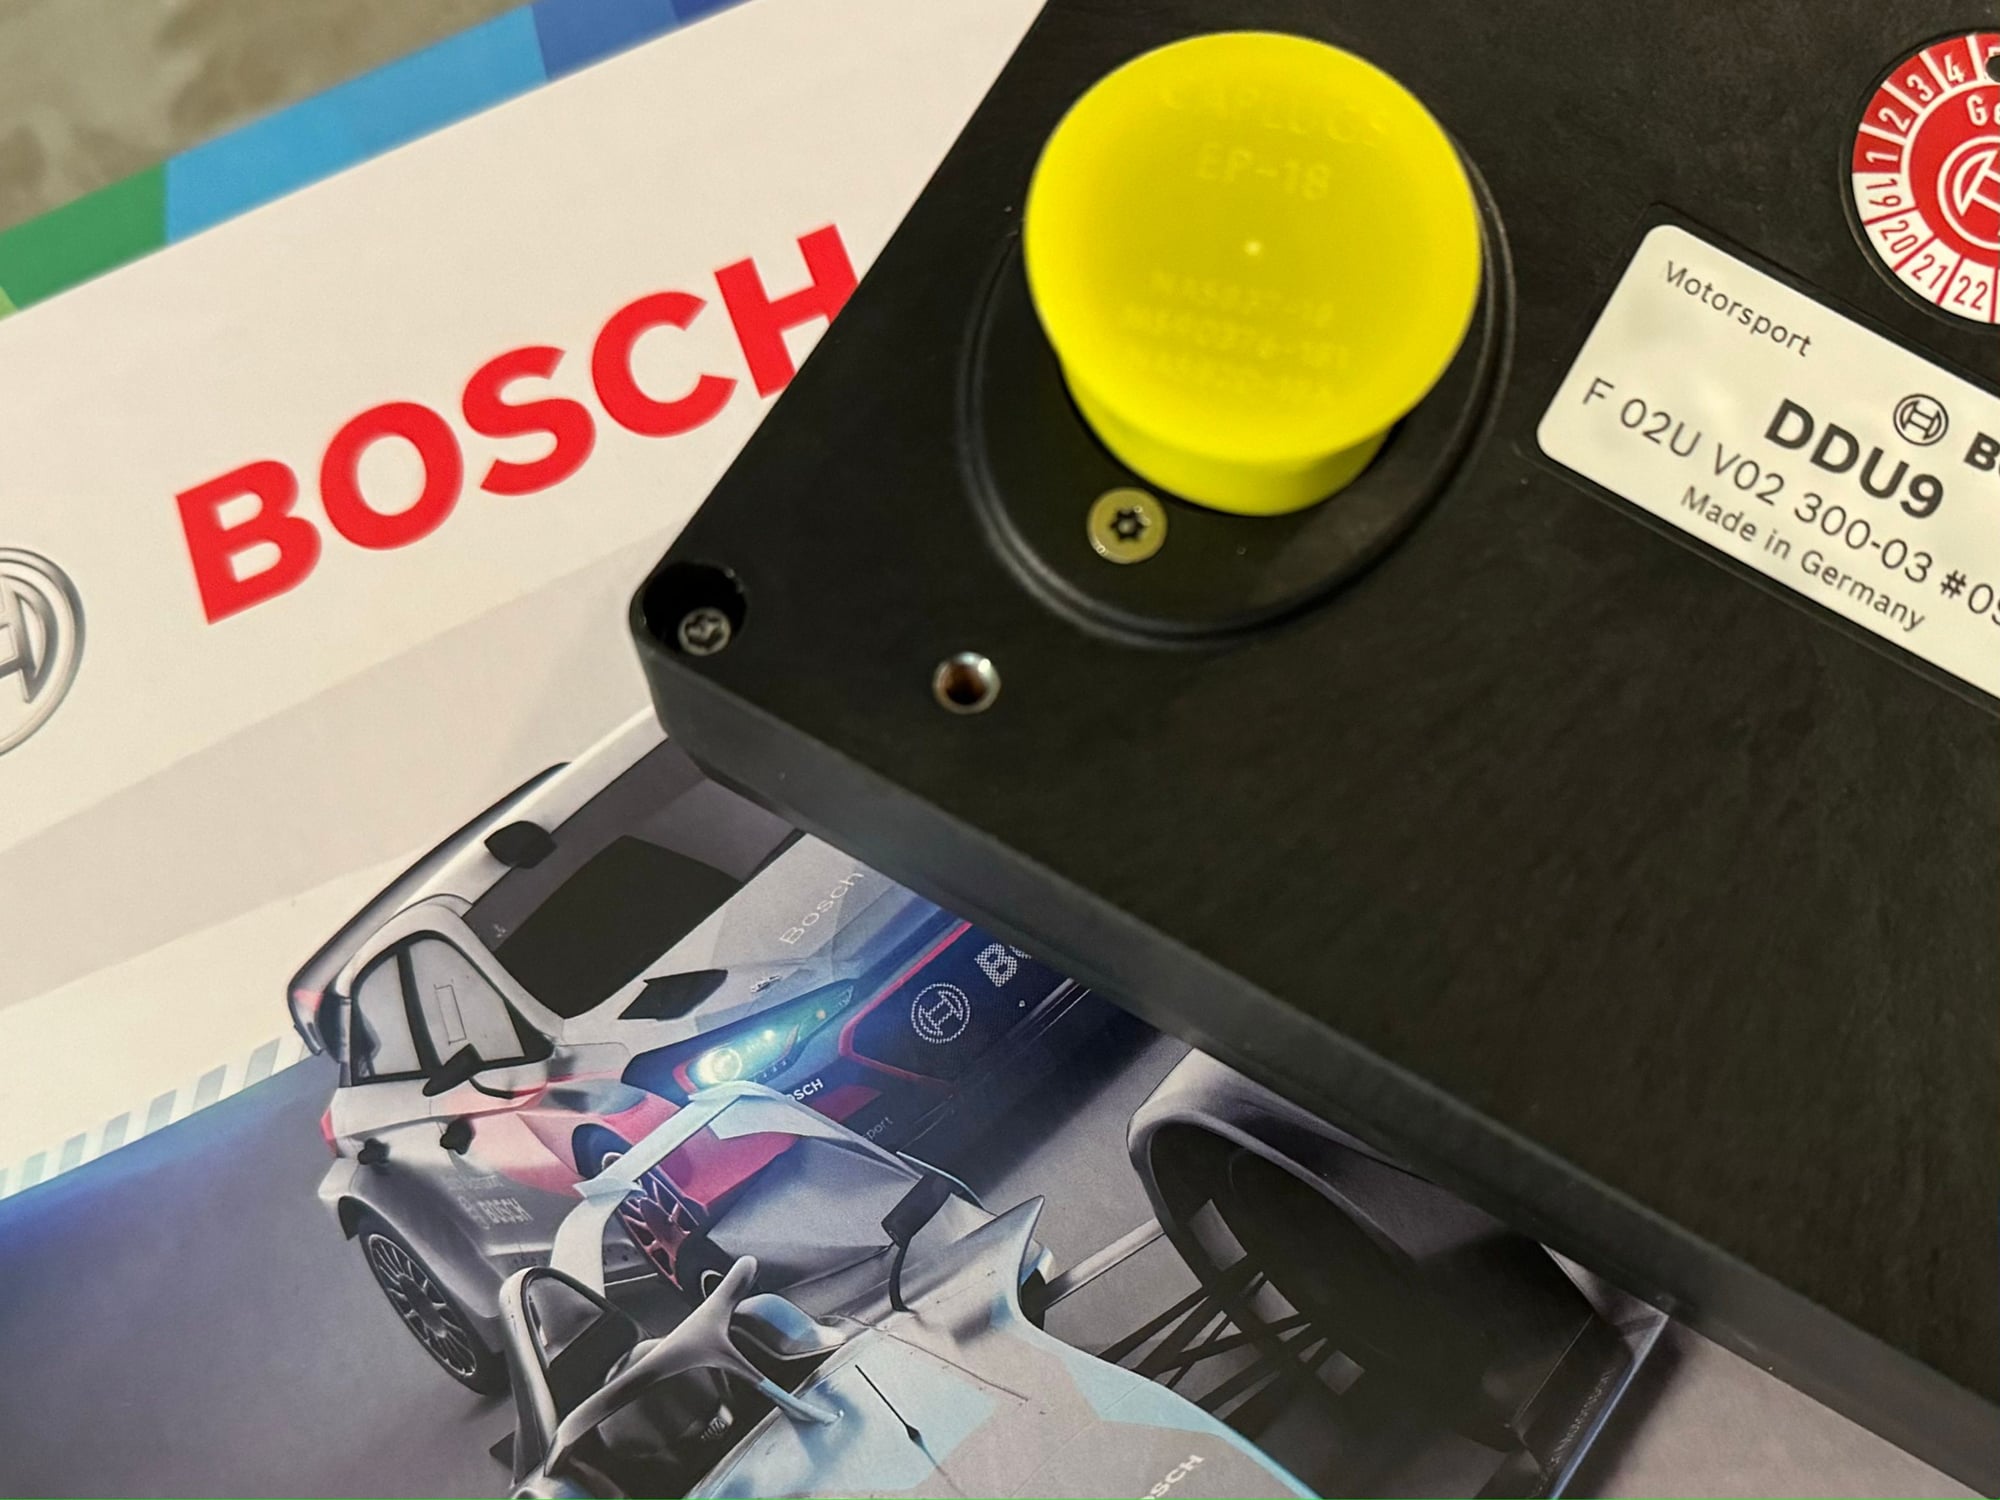 Audio Video/Electronics - BOSCH DDU9 / Dashboard with datalogger *NEW* - New - -1 to 2025  All Models - Las Vegas, NV 89103, United States